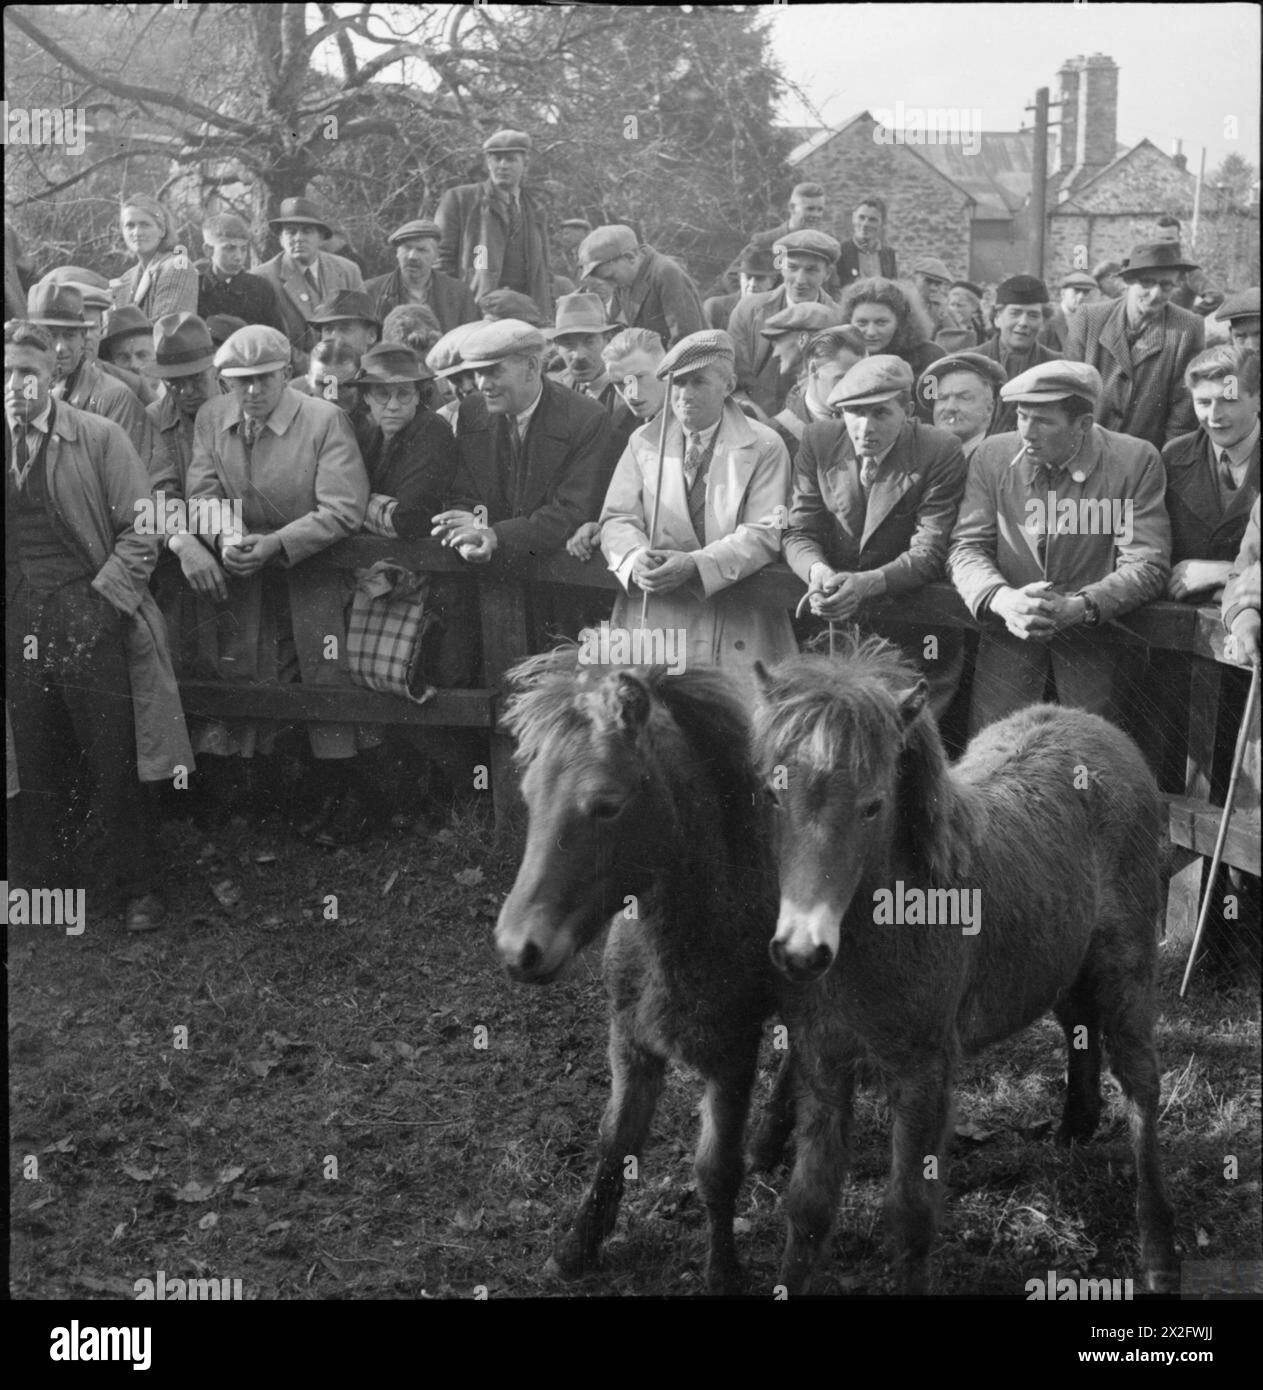 BAMPTON FAIR: PONY, SHEEP AND CATTLE SALES IN THE VILLAGE OF BAMPTON, DEVON, ENGLAND, UK, OCTOBER 1943 - Farmers and dealers inspect two Exmoor ponies in the sale ring at Bampton Fair. Several women are also in the crowd of people leaning over the fence to inspect the stock as it walks around the ring, awaiting purchase Stock Photo